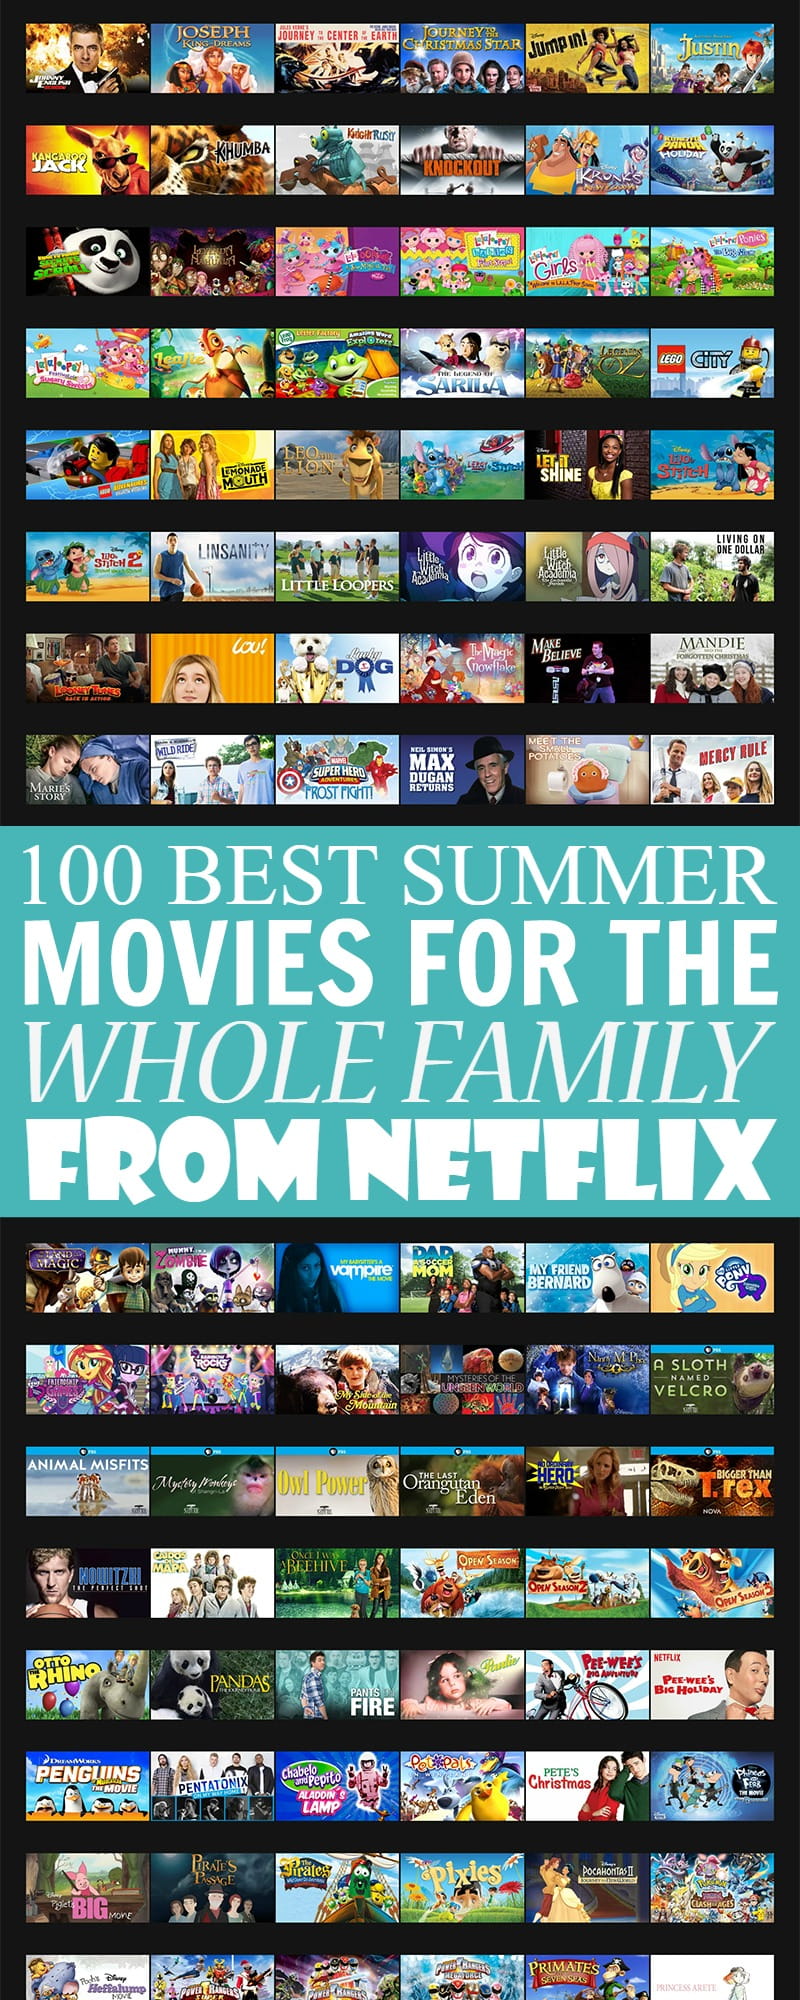 100 best summer movies for the whole family on netflix - take a break from summer fun to enjoy a movie with the family from this list of 100 family-friendly movies currently on netflix.